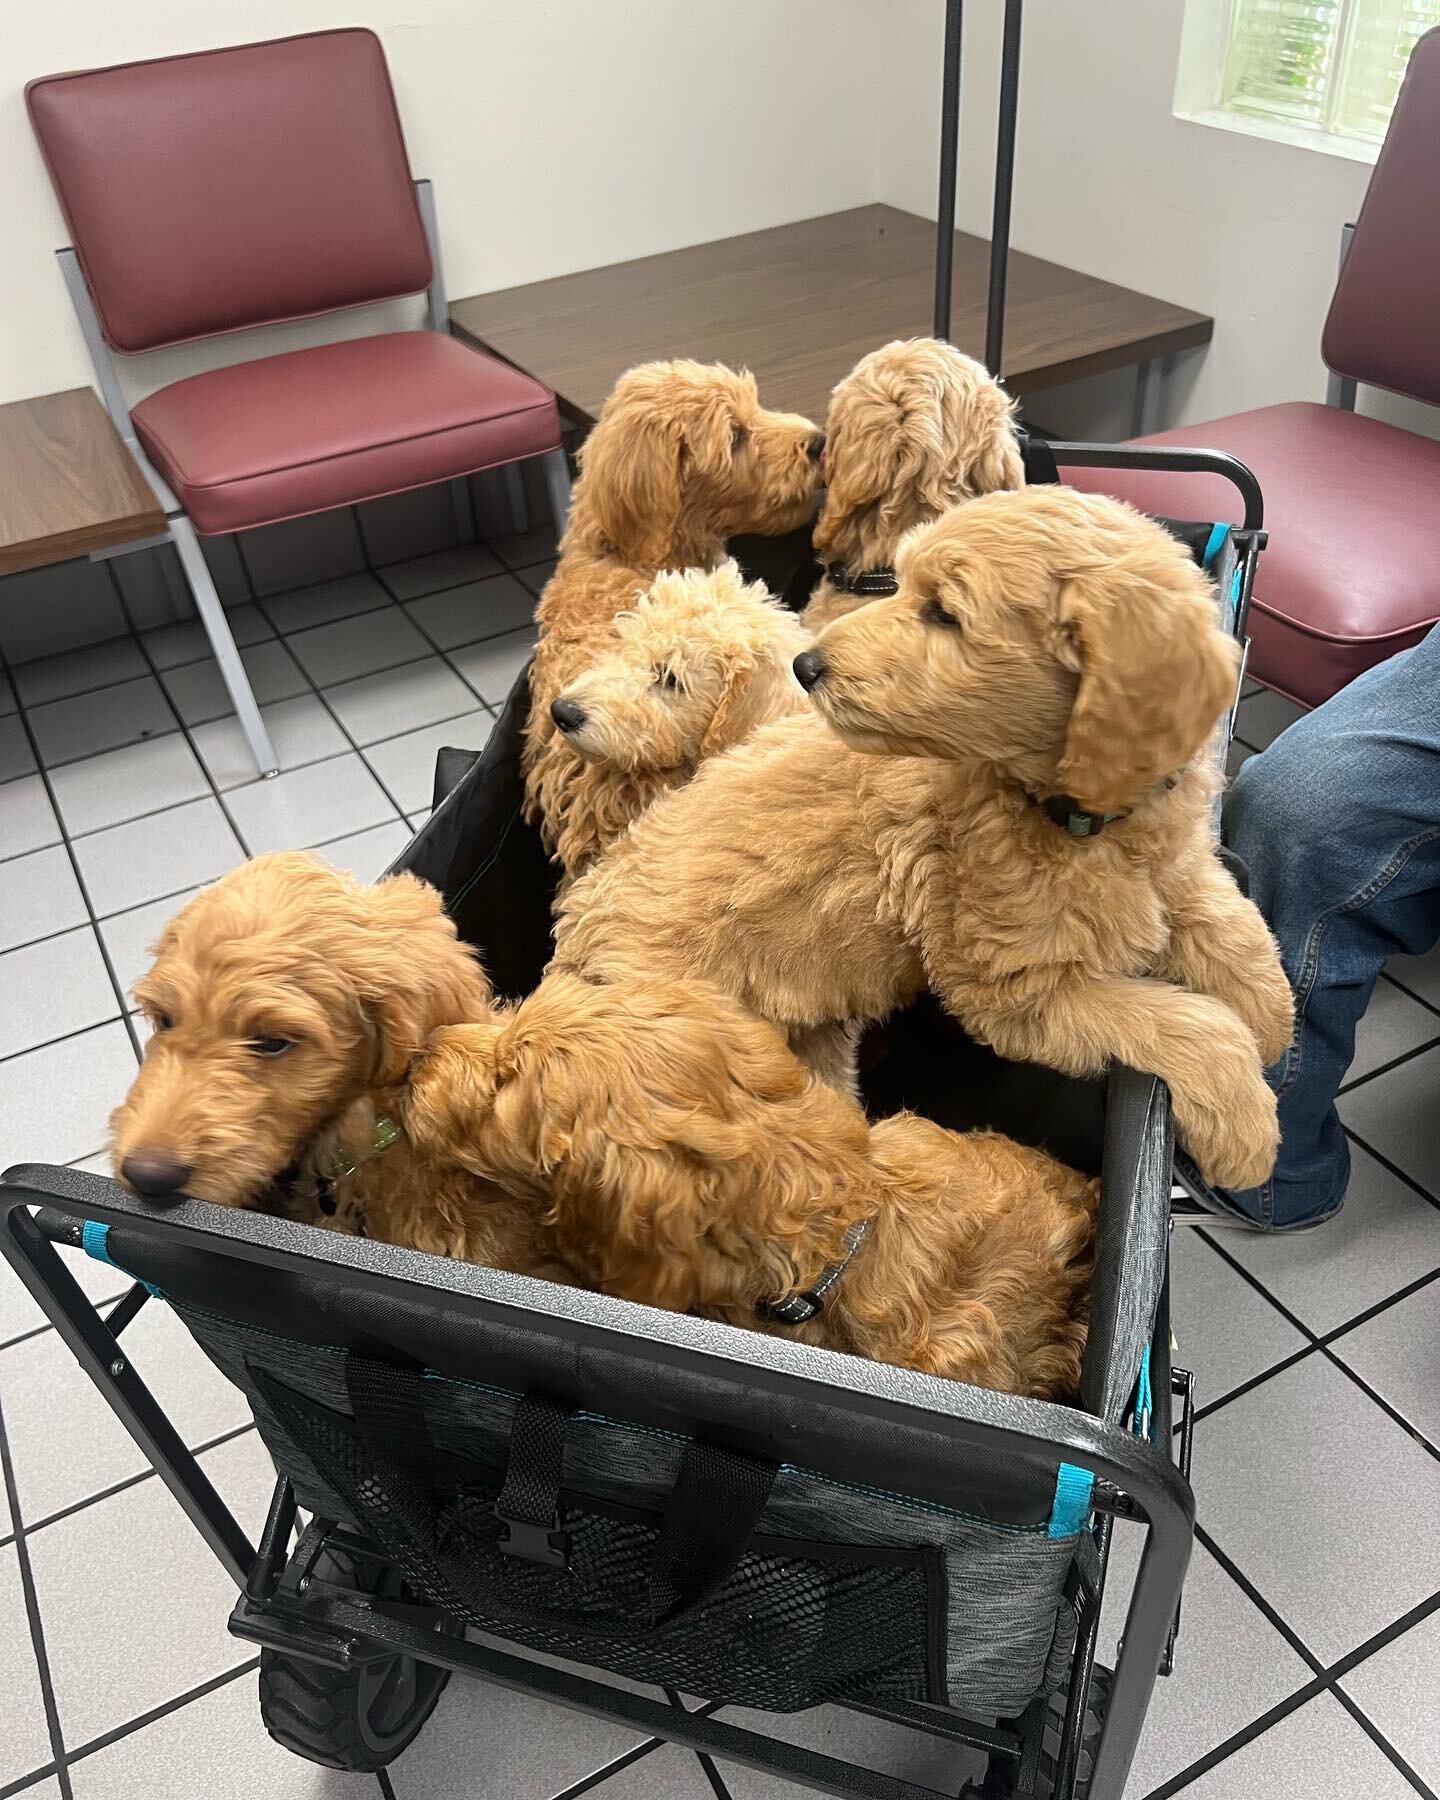 Happy Monday from our adorable patients!🐾🐶🤍 #puppies #doodlesofinstagram